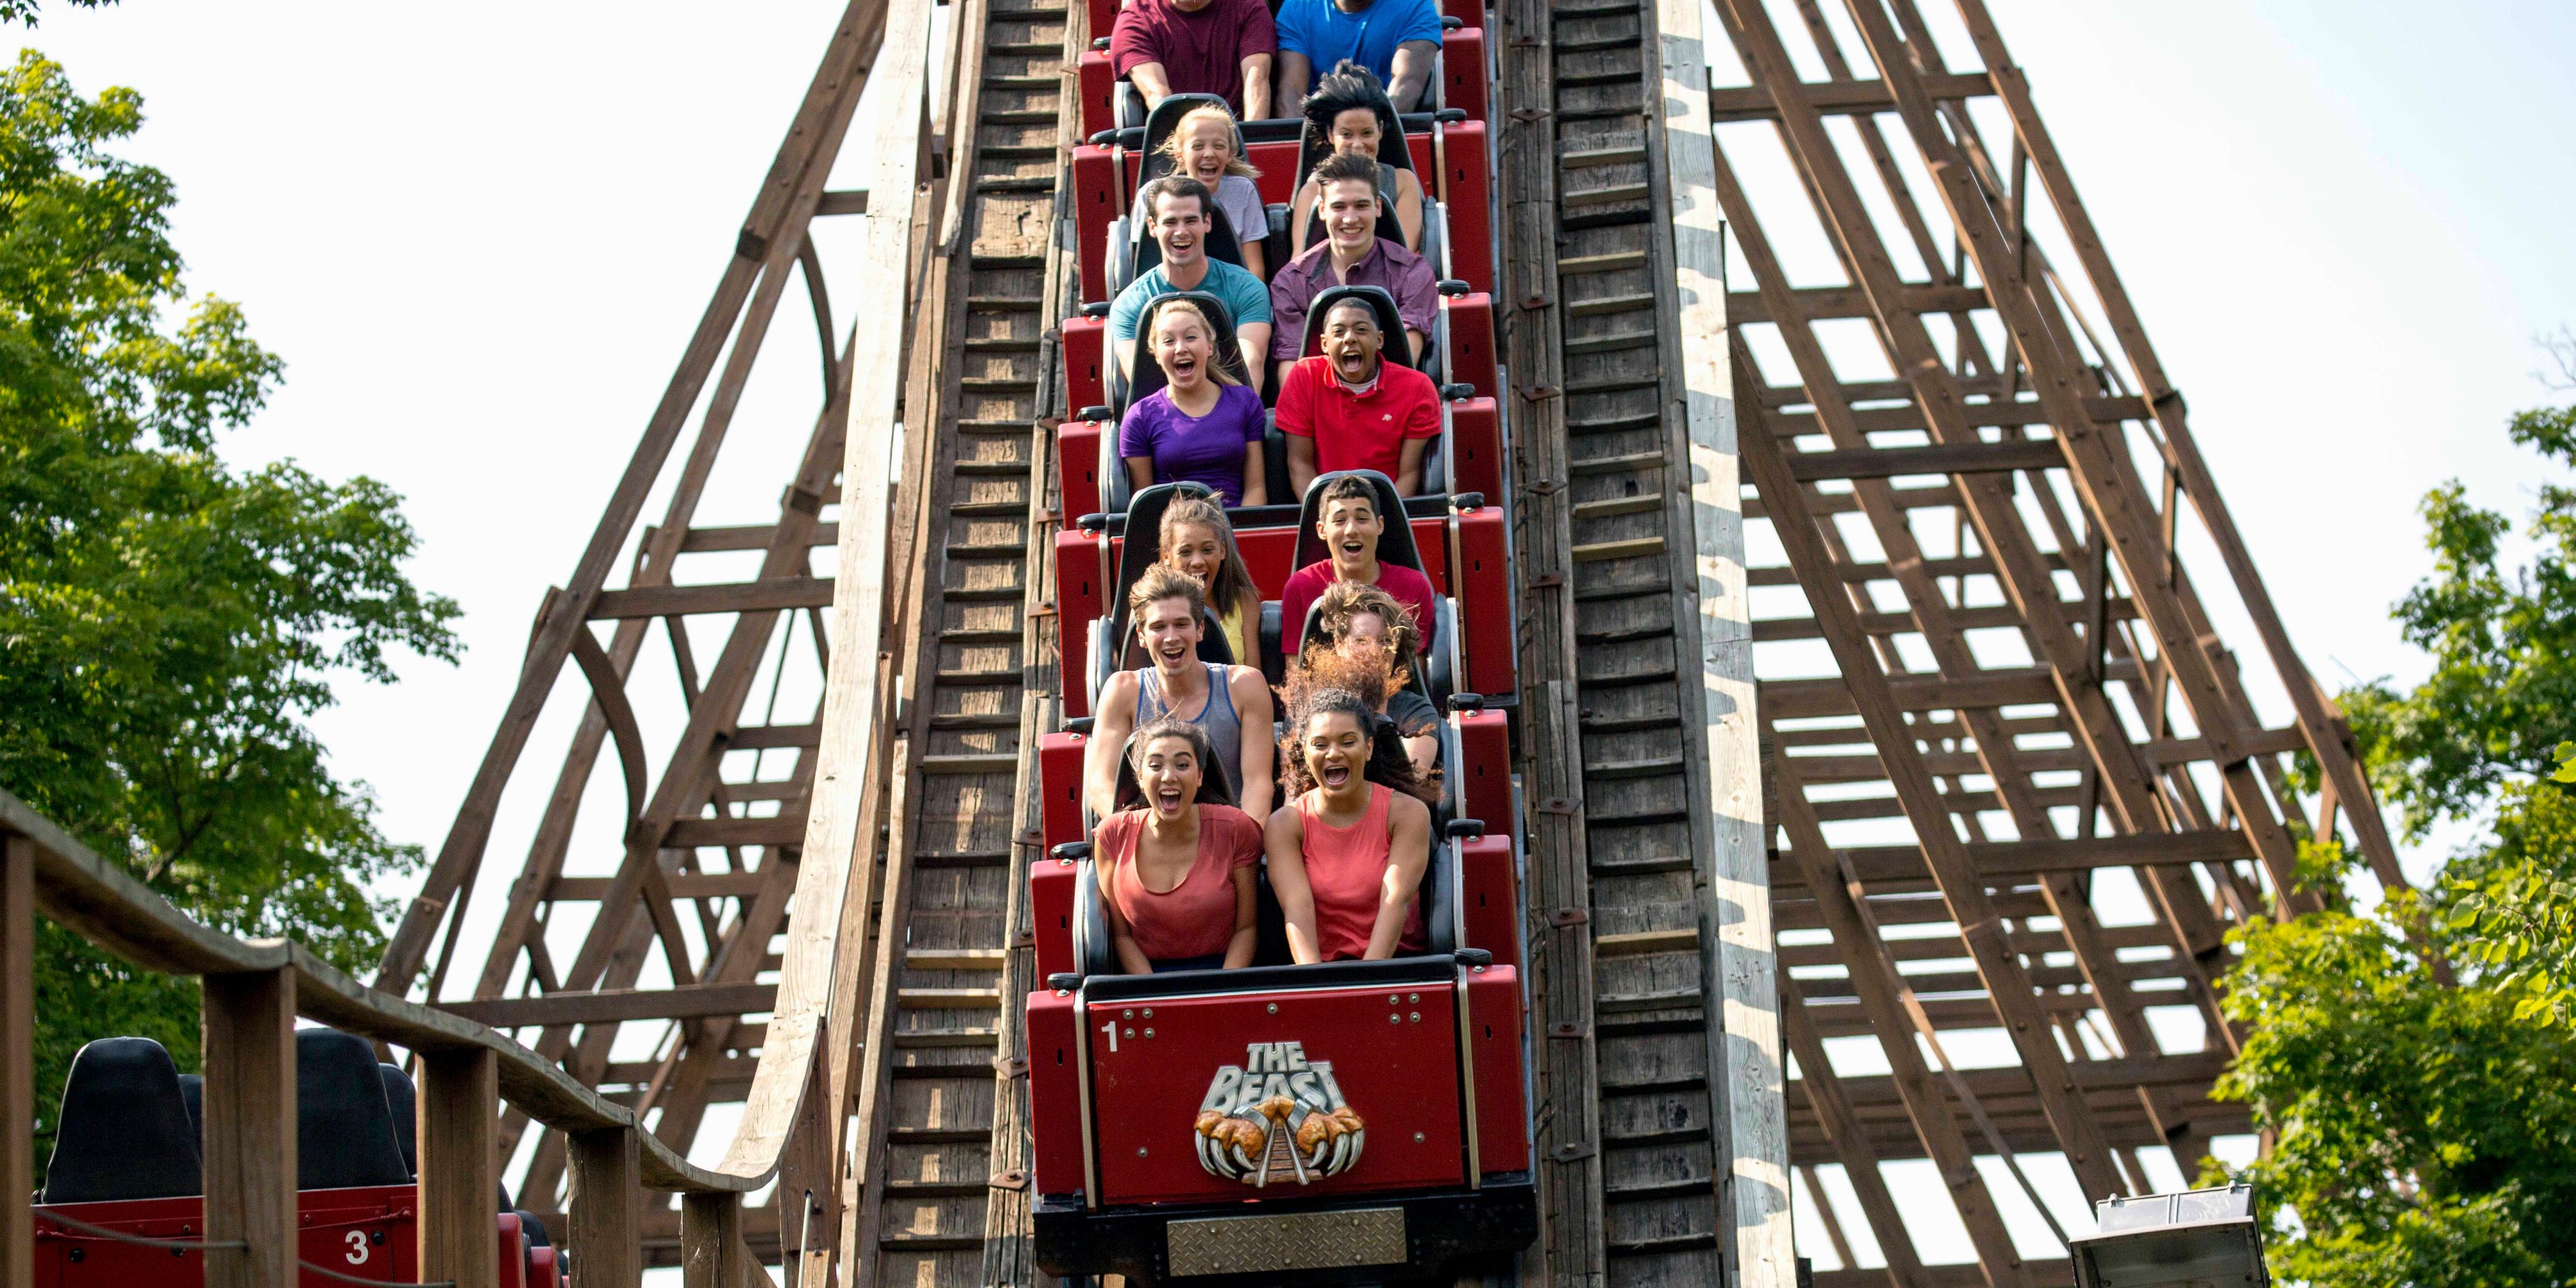 With more than 100 rides, shows and attractions, Kings Island offers the perfect combination of world-class thrills and family attractions. Guests can experience 15 roller coasters, including Mystic Timbers, voted “Best New Ride” in 2017 by Amusement Today; an 18-time, award-winning kids’ area and 33-acre water park. 